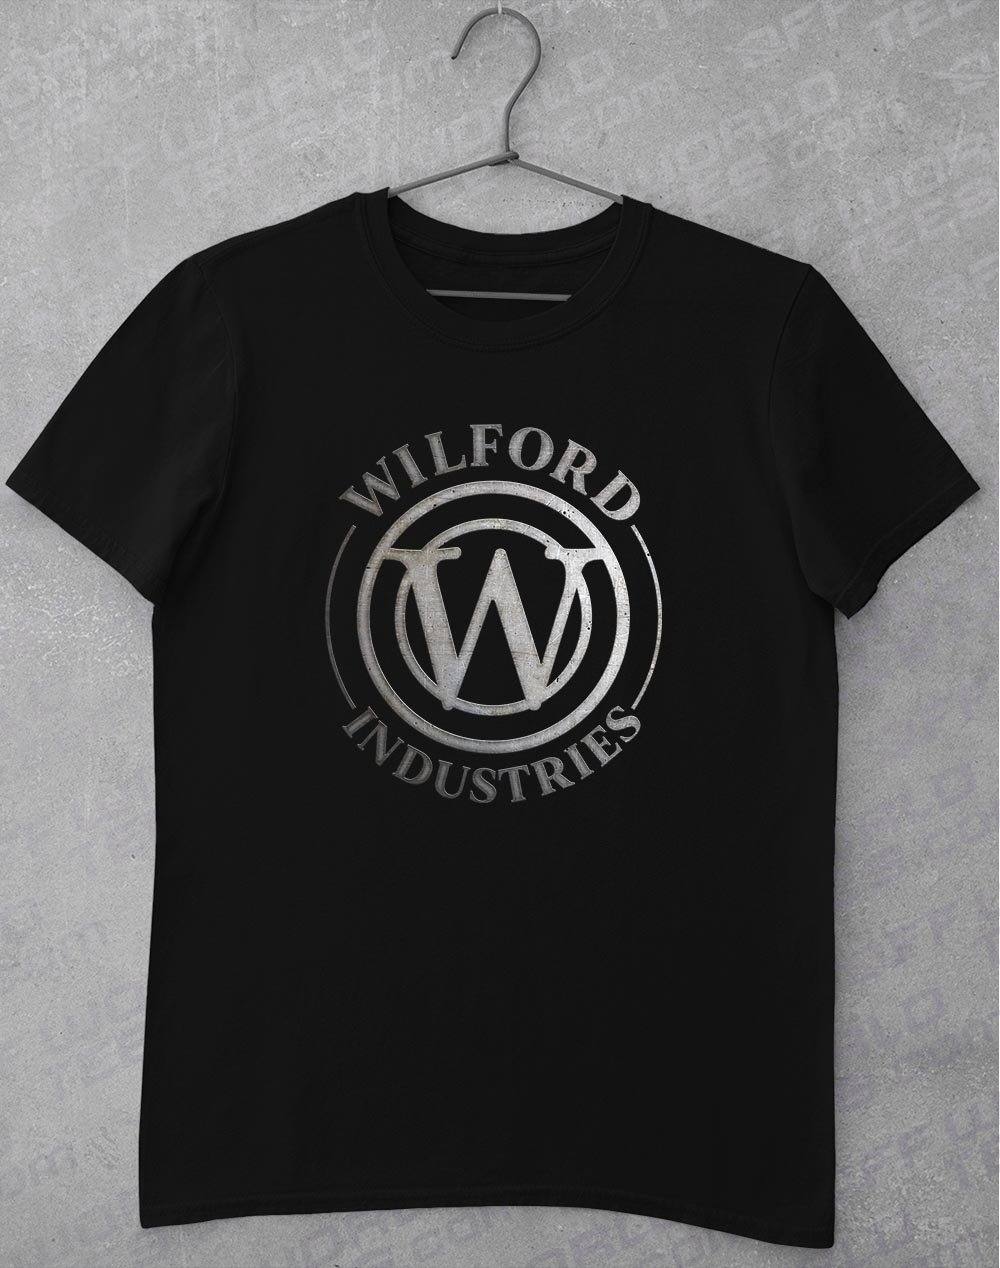 Wilford Industries T-Shirt S / Black  - Off World Tees